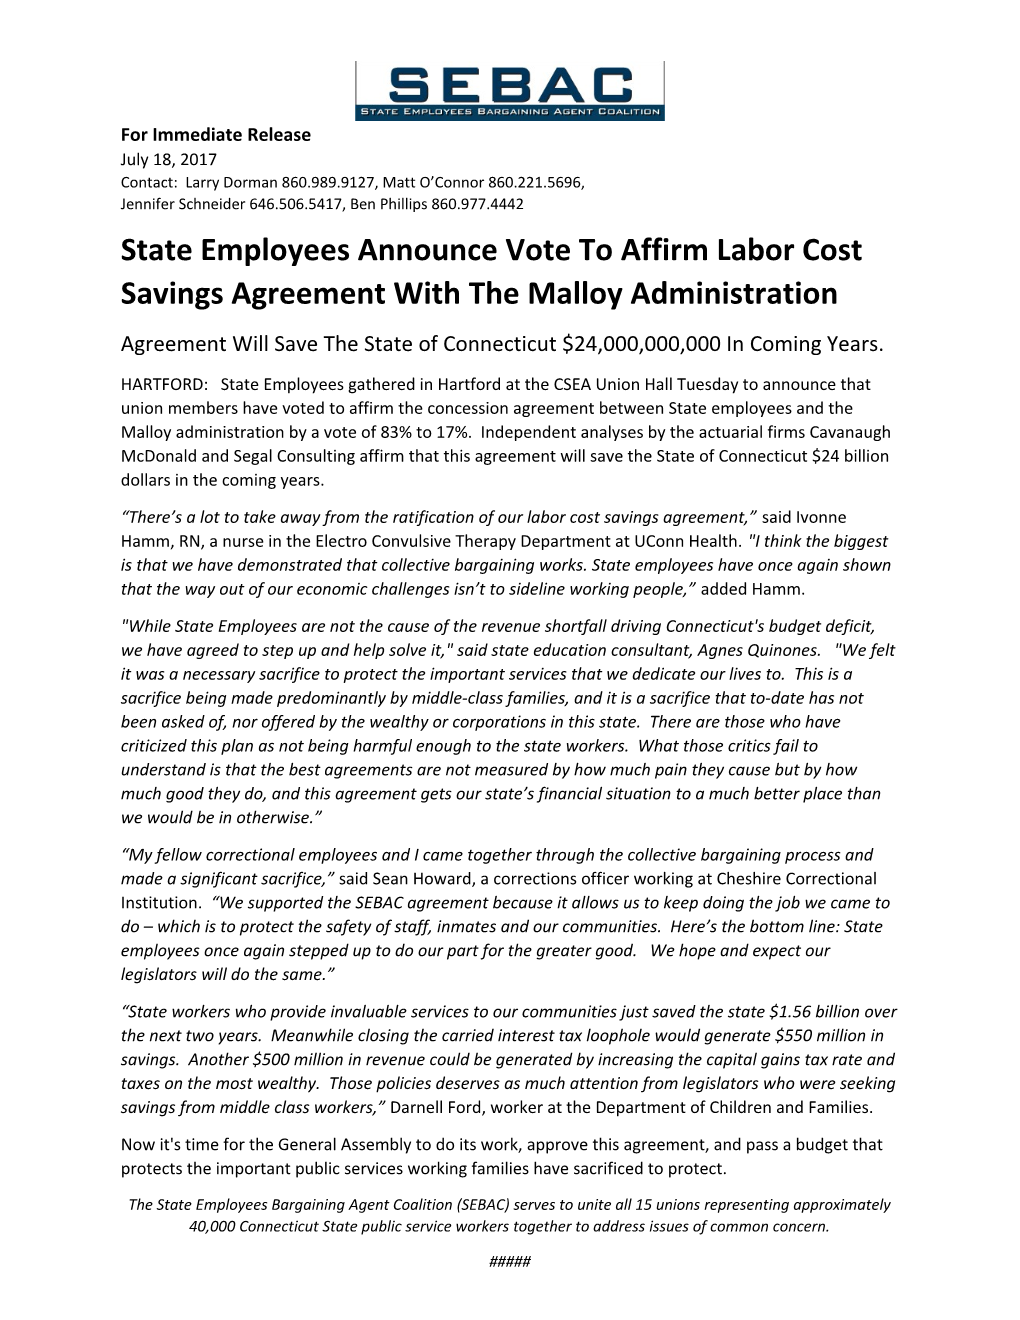 State Employees Announce Vote to Affirm Labor Cost Savings Agreement with the Malloy